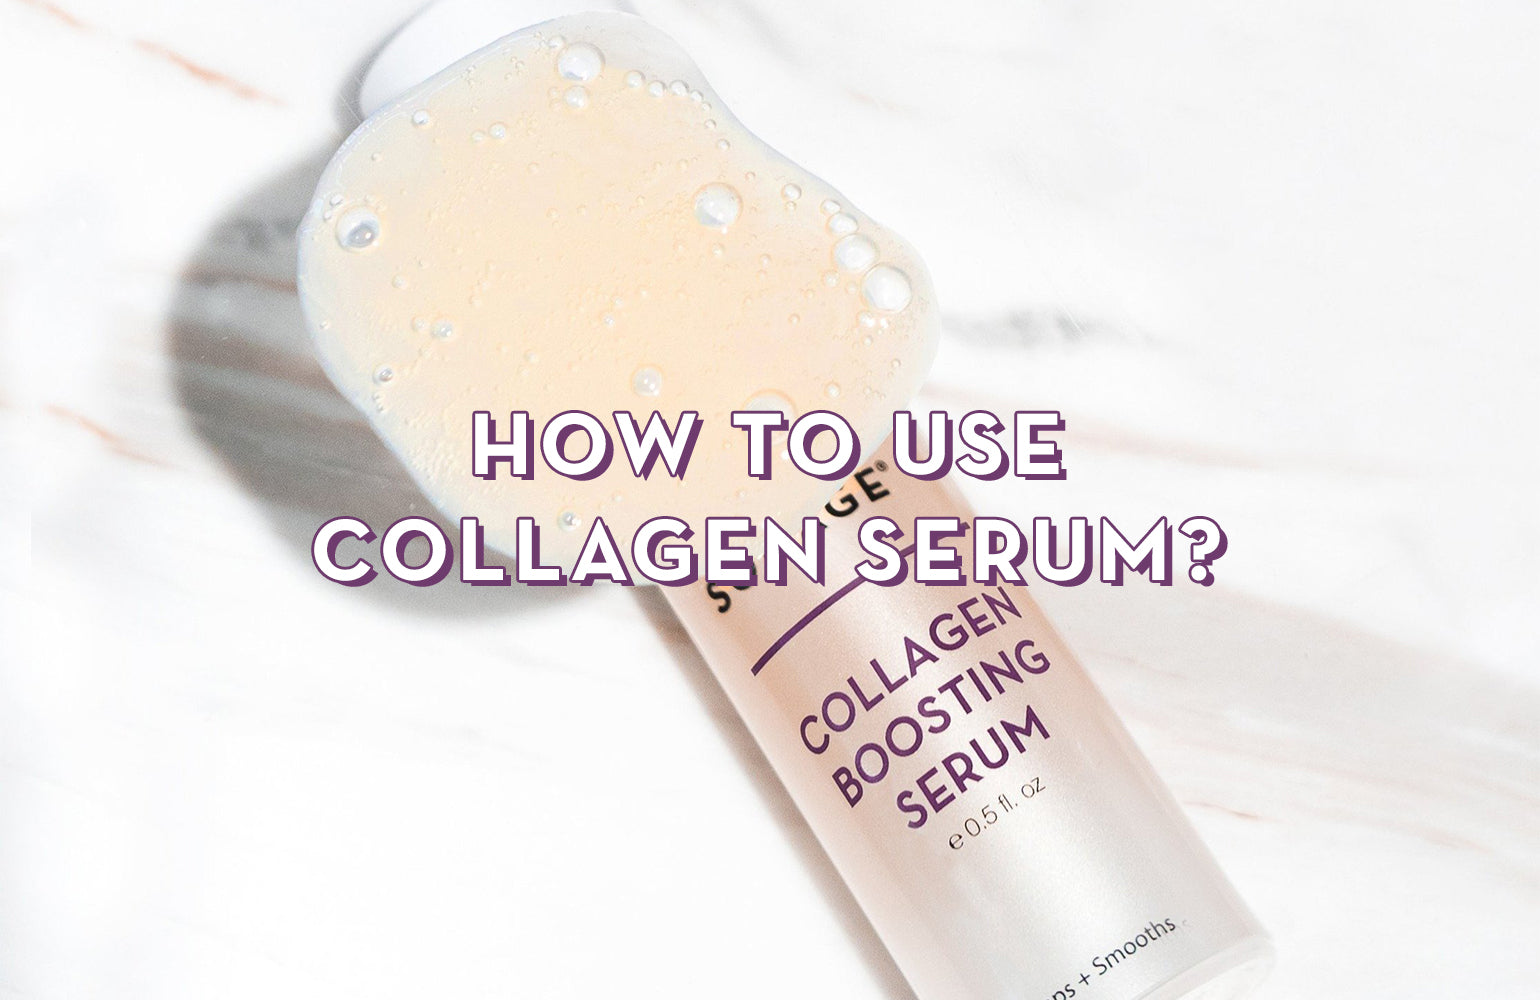 HOW TO USE COLLAGEN SERUM?